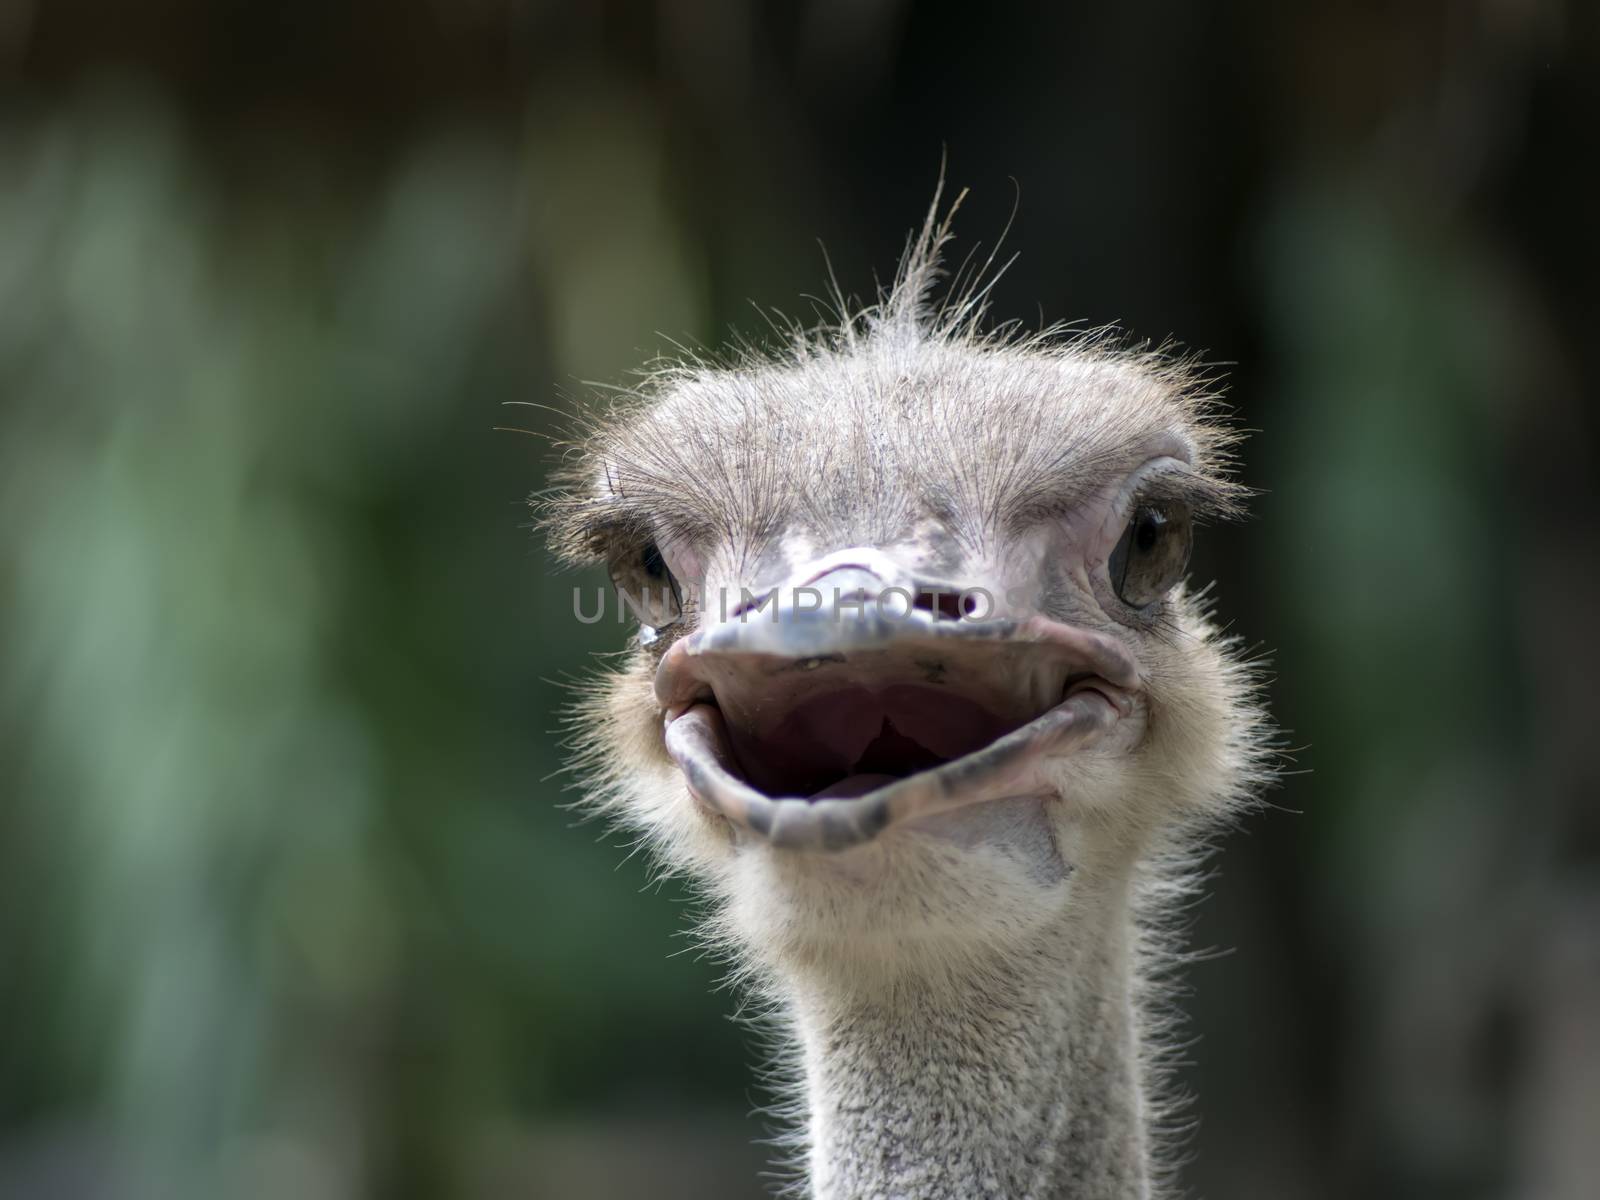 Common Ostrich Foreface. Struthio Camelus is either one or two species of large flightless birds native to Africa.